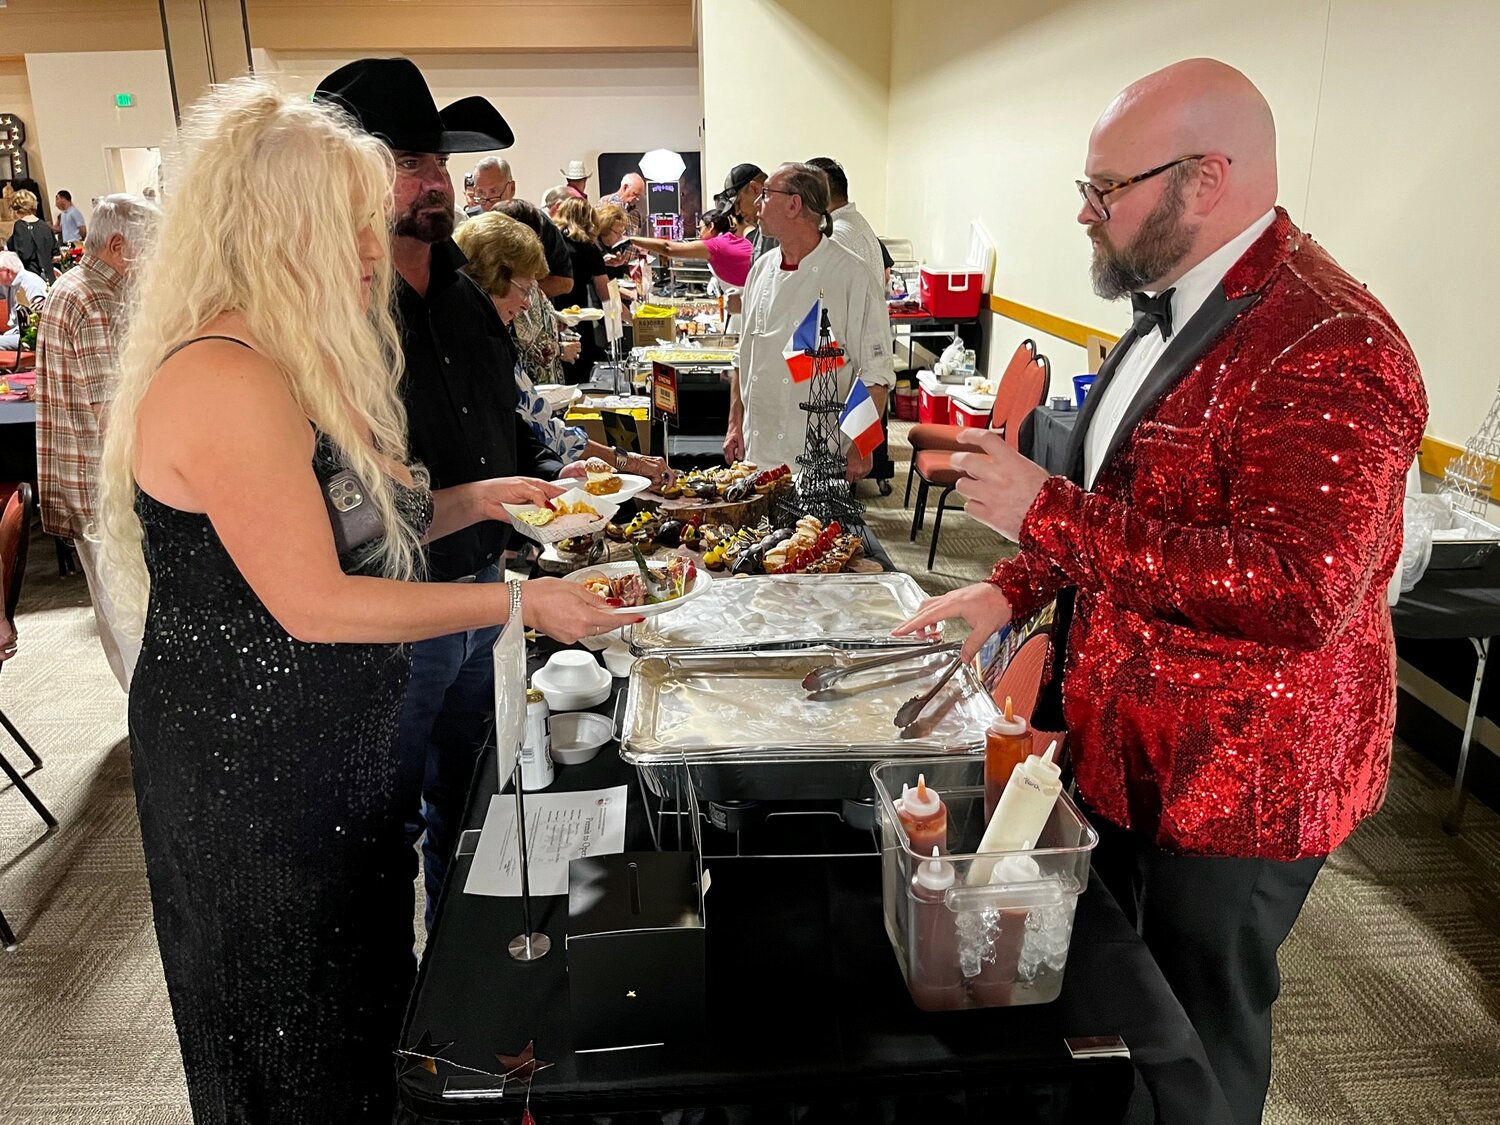 Dr. John Tucker of Mesilla Valley Hospice describes his dish to a guest at the annual Men Who Cook event Aug. 12 at the Las Cruces Convention Center, a benefit for Mesilla Valley Hospice.